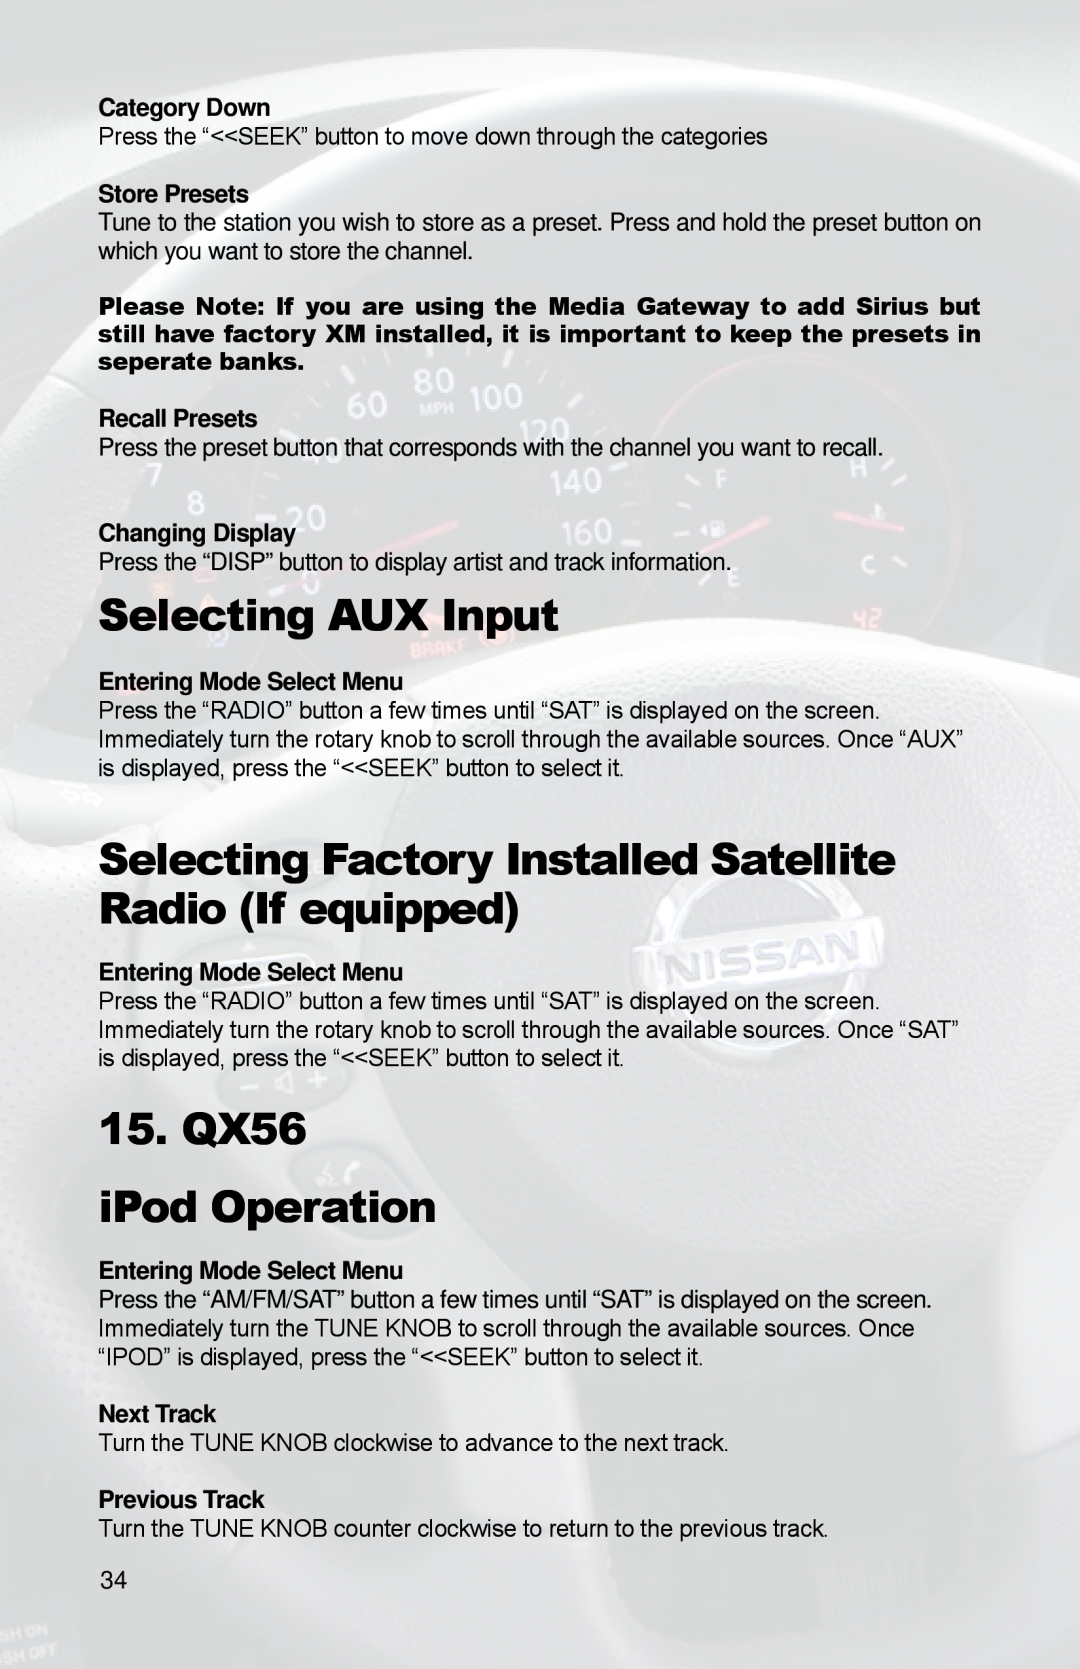 iSimple PGHNI2 owner manual 15. QX56 iPod Operation, Selecting AUX Input 